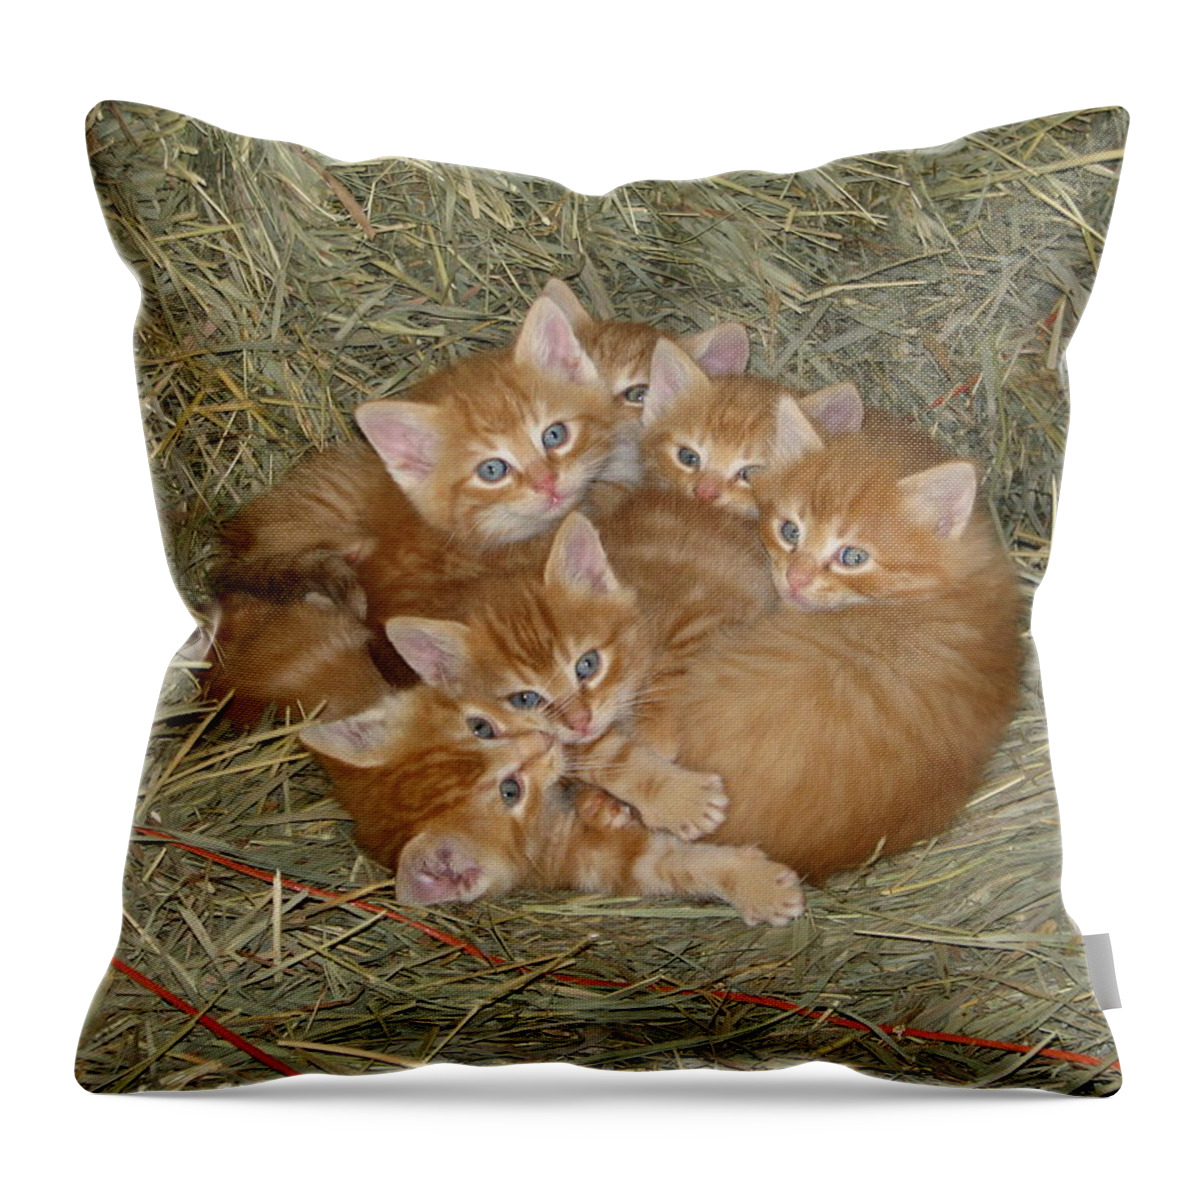 Kittens Throw Pillow featuring the photograph Six Kittens by Keith Stokes